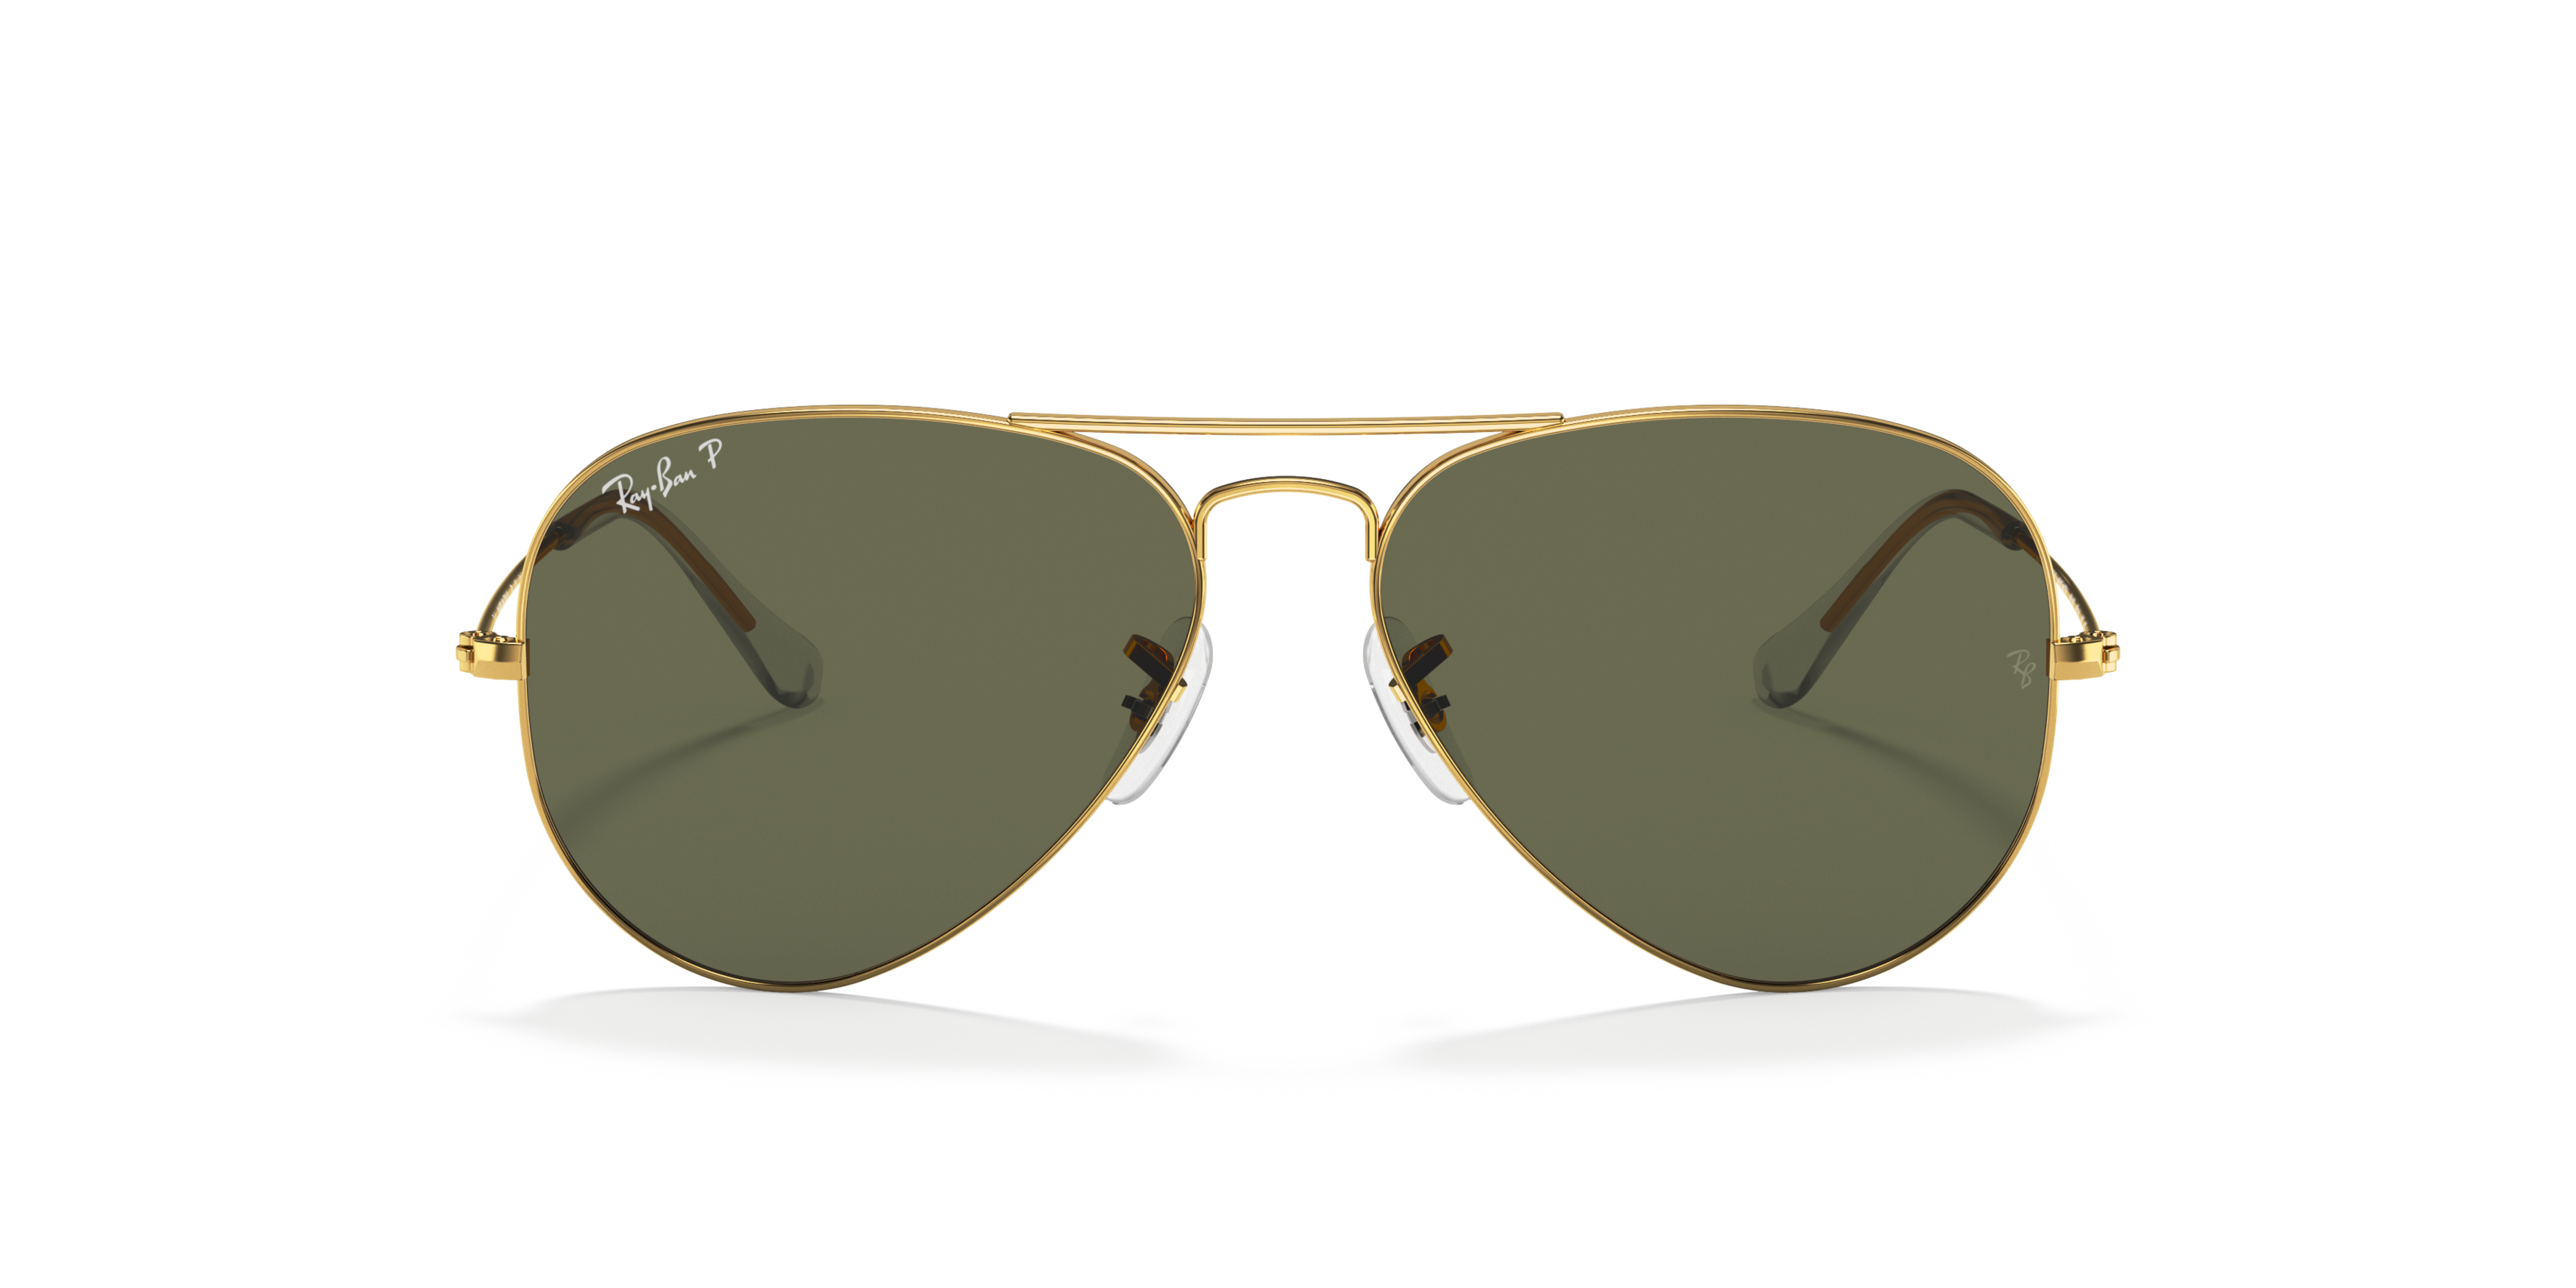 [products.image.front] Ray-Ban Aviator 0RB3025 001/58